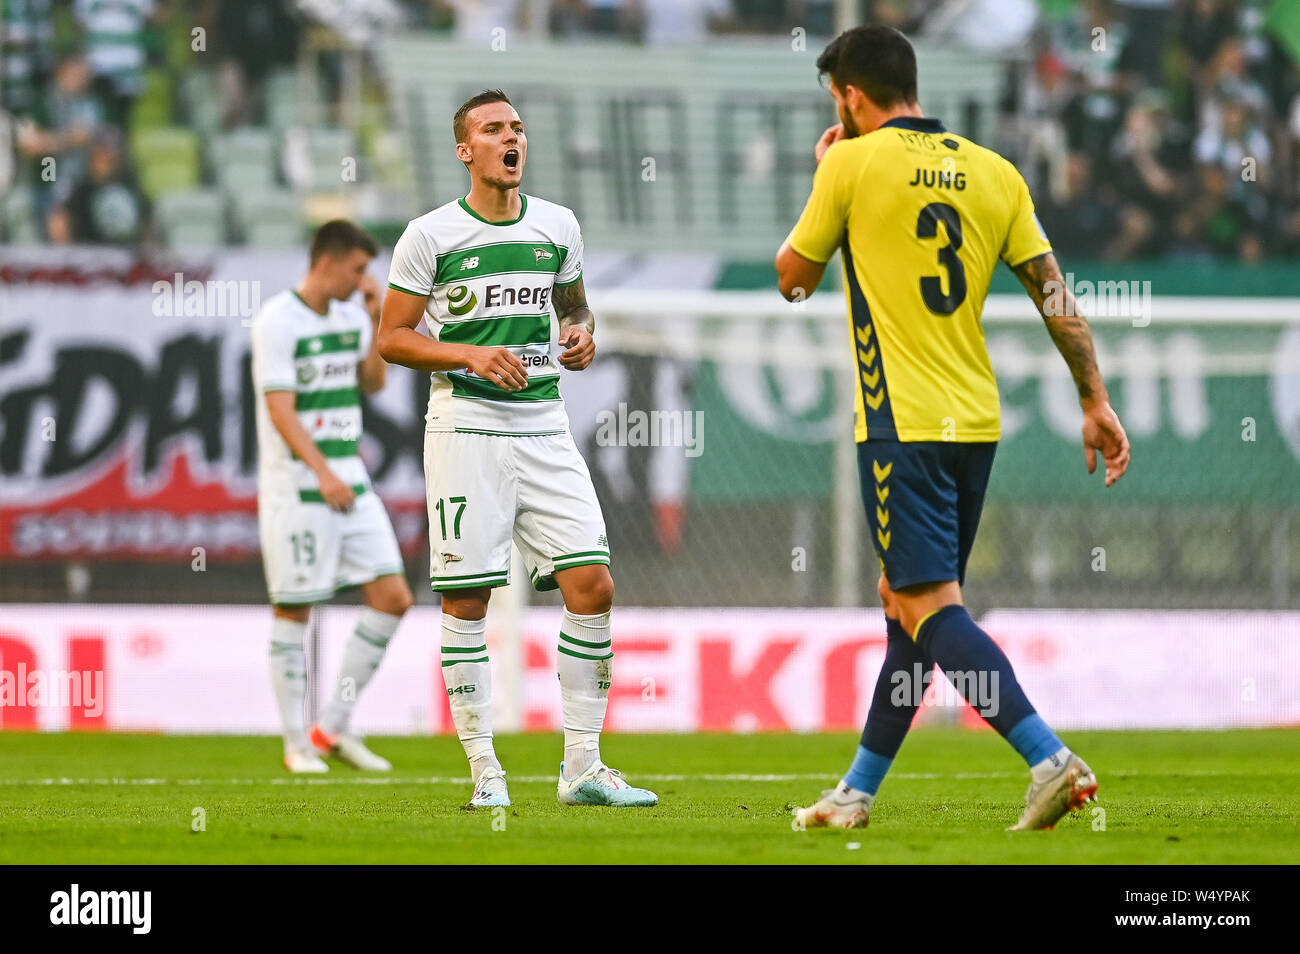 Lukas Haraslin from Lechia Gdansk seen in action during the UEFA Europa  League Qualifiers match between Lechia Gdansk and Brondby IF at Energa  Stadium.(Final score; Lechia Gdansk 2:1 Brondby IF Stock Photo -